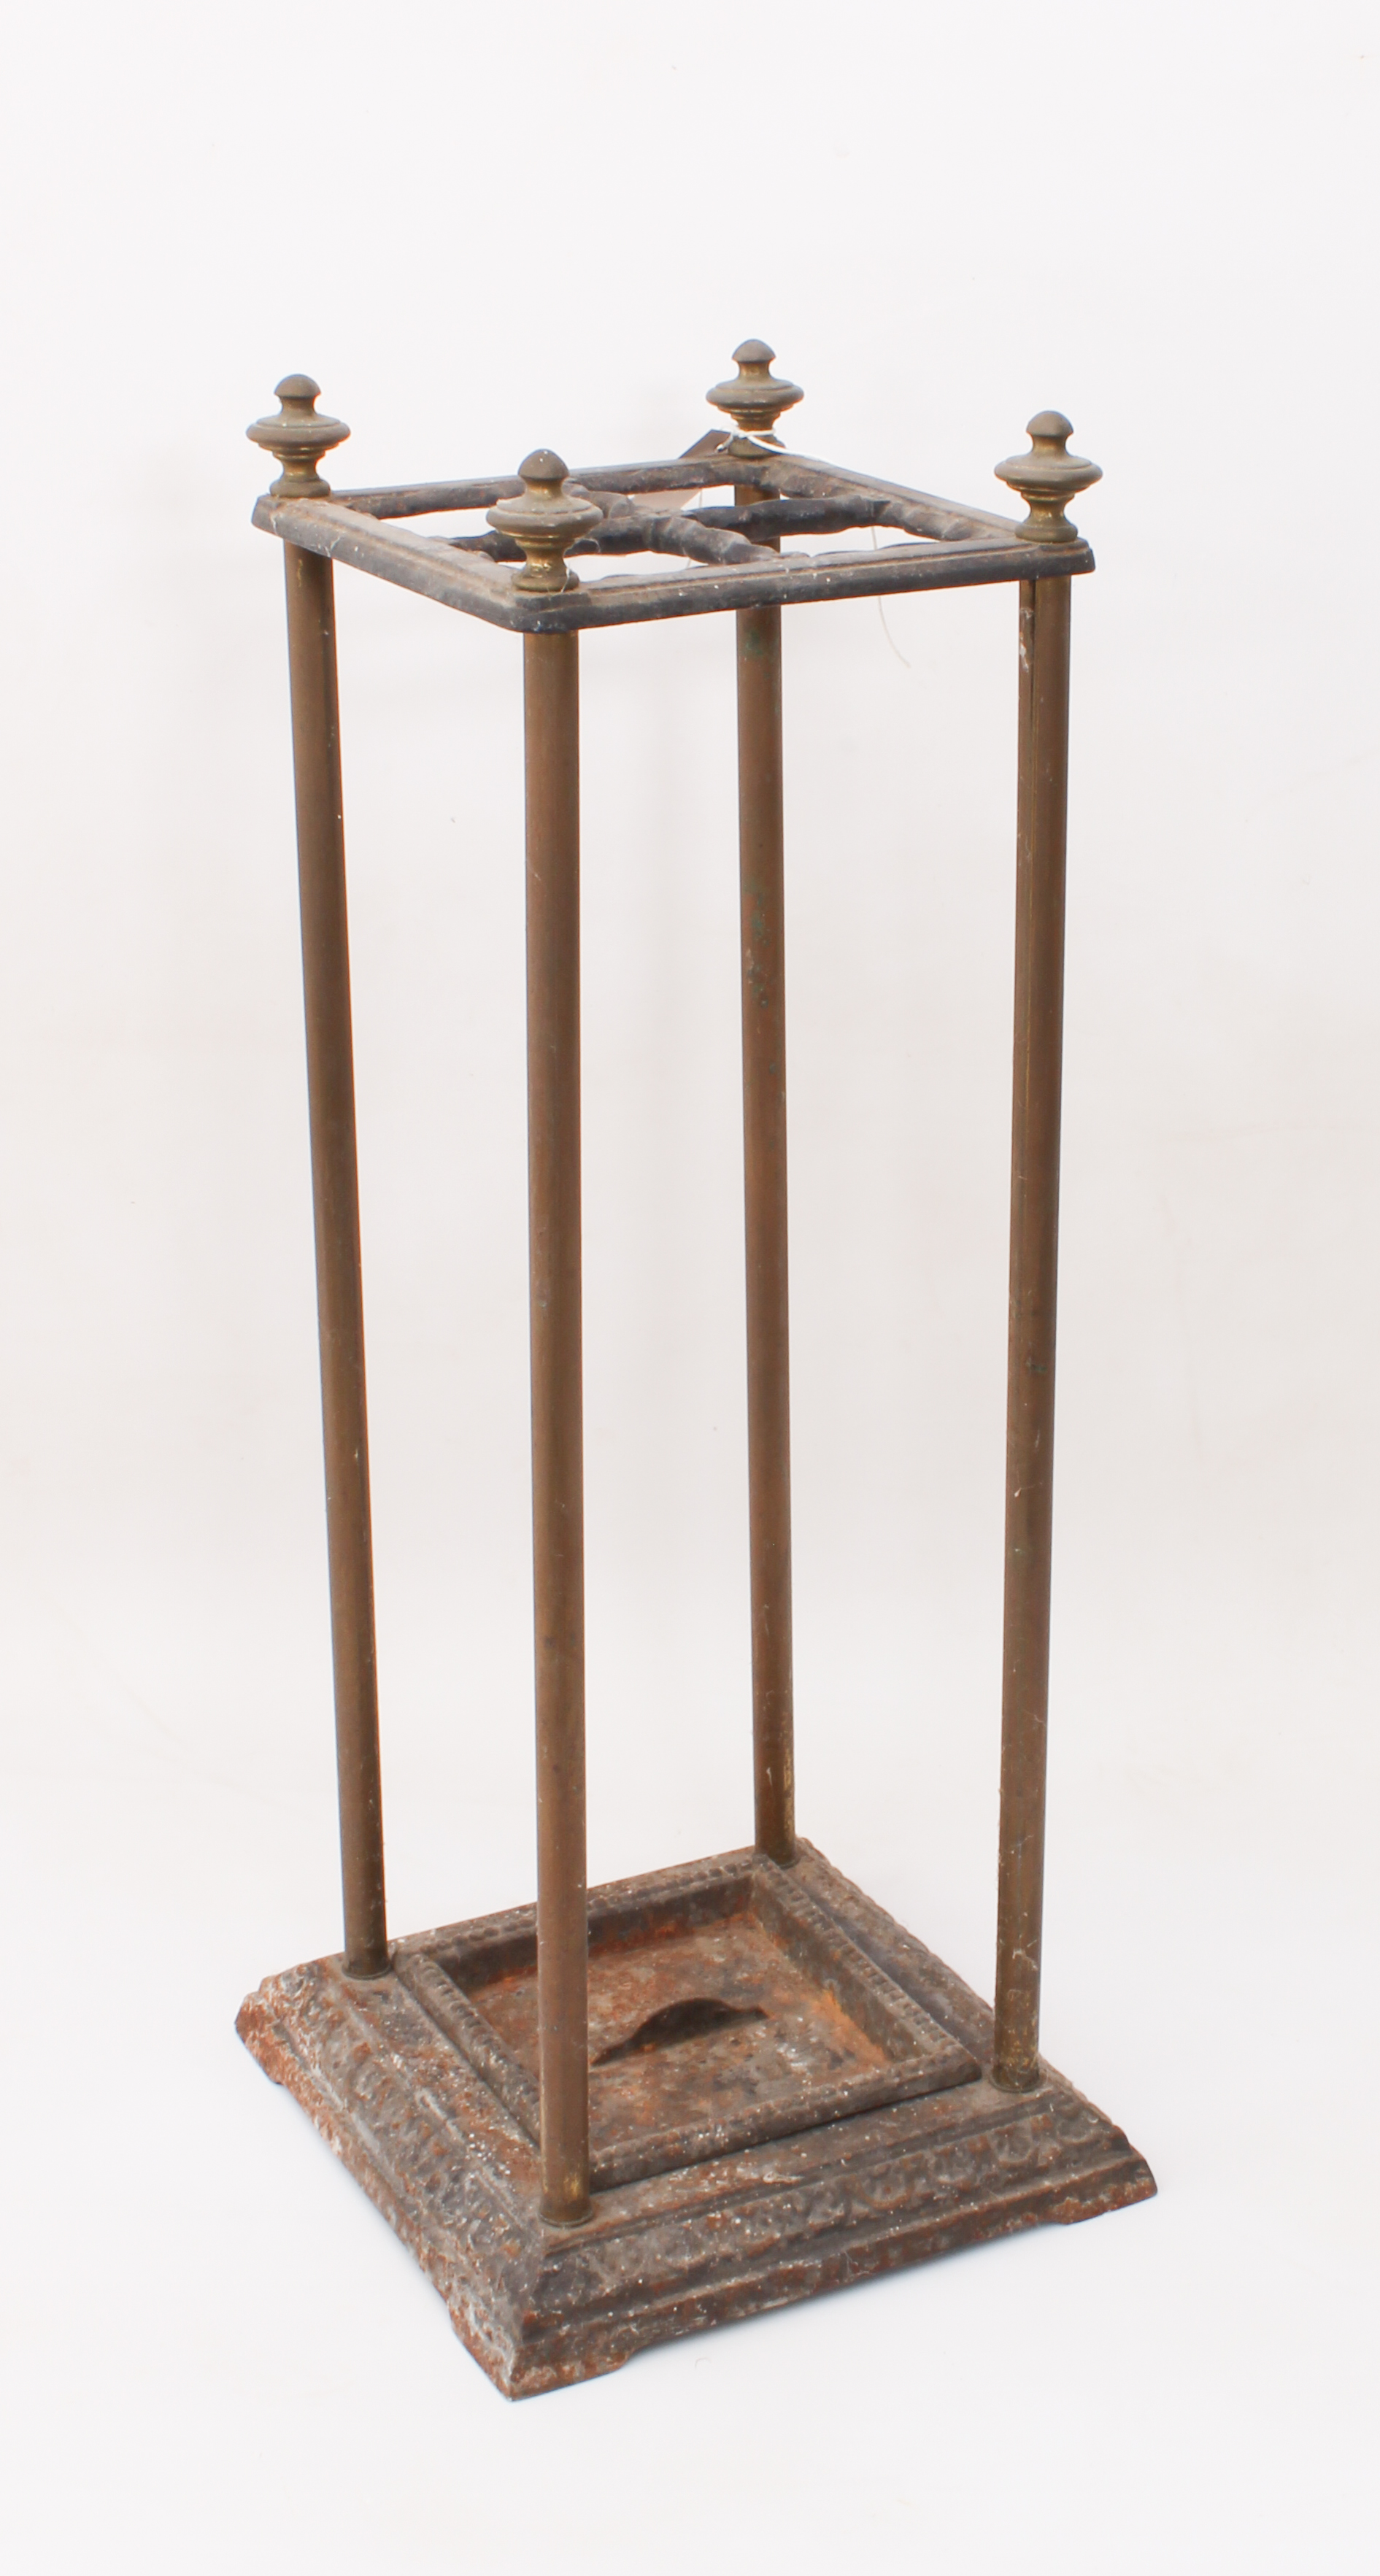 A Victorian-style cast iron and brass stick-stand - 62 cm high.